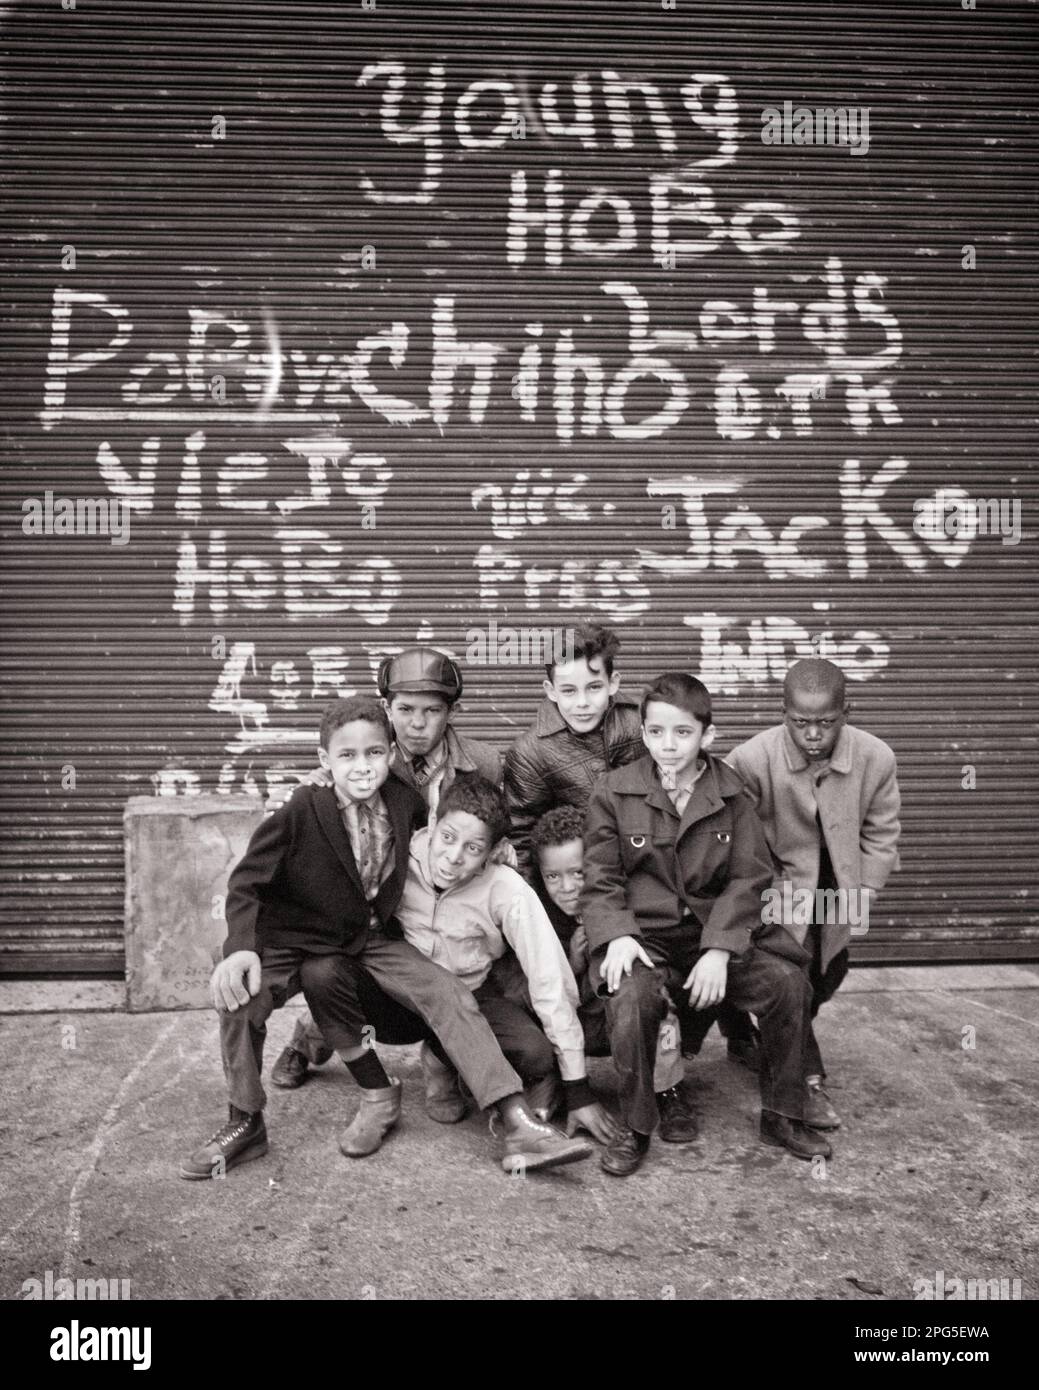 1970s GROUP OF HISPANIC AND AFRICAN AMERICAN BOYS POSED LOOKING AT CAMERA UNDER SOME GRAFFITI NEW YORK CITY NY USA - w5857 HAR001 HARS HALF-LENGTH UNITED STATES OF AMERICA MALES NY B&W EYE CONTACT HAPPINESS WELFARE AFRICAN-AMERICANS AFRICAN-AMERICAN AND RECREATION SEVEN BLACK ETHNICITY NAMES PRIDE NYC CONCEPTUAL NEW YORK 7 CITIES FRIENDLY SUPPORT NEW YORK CITY SOME TAGGING COOPERATION CREATIVITY GRAFFITI JUVENILES POSED PRE-TEEN PRE-TEEN BOY BLACK AND WHITE CAUCASIAN ETHNICITY HAR001 HISPANIC ETHNICITY IDENTITY OLD FASHIONED AFRICAN AMERICANS Stock Photo